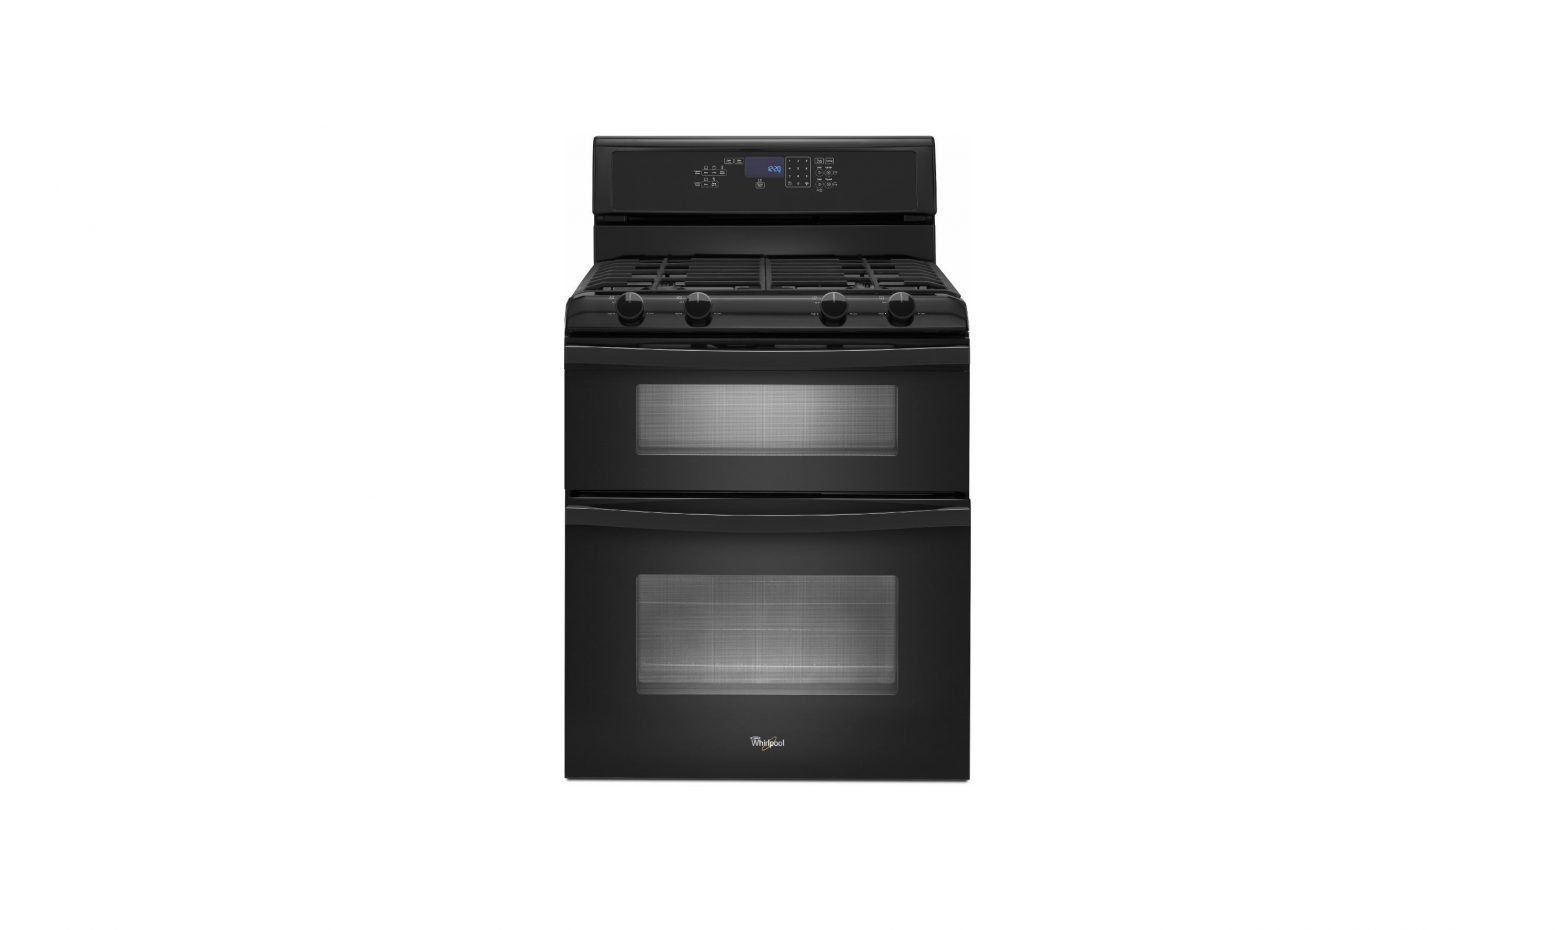 Whirlpool Freestanding Gas Range with Double Ovens User Guide